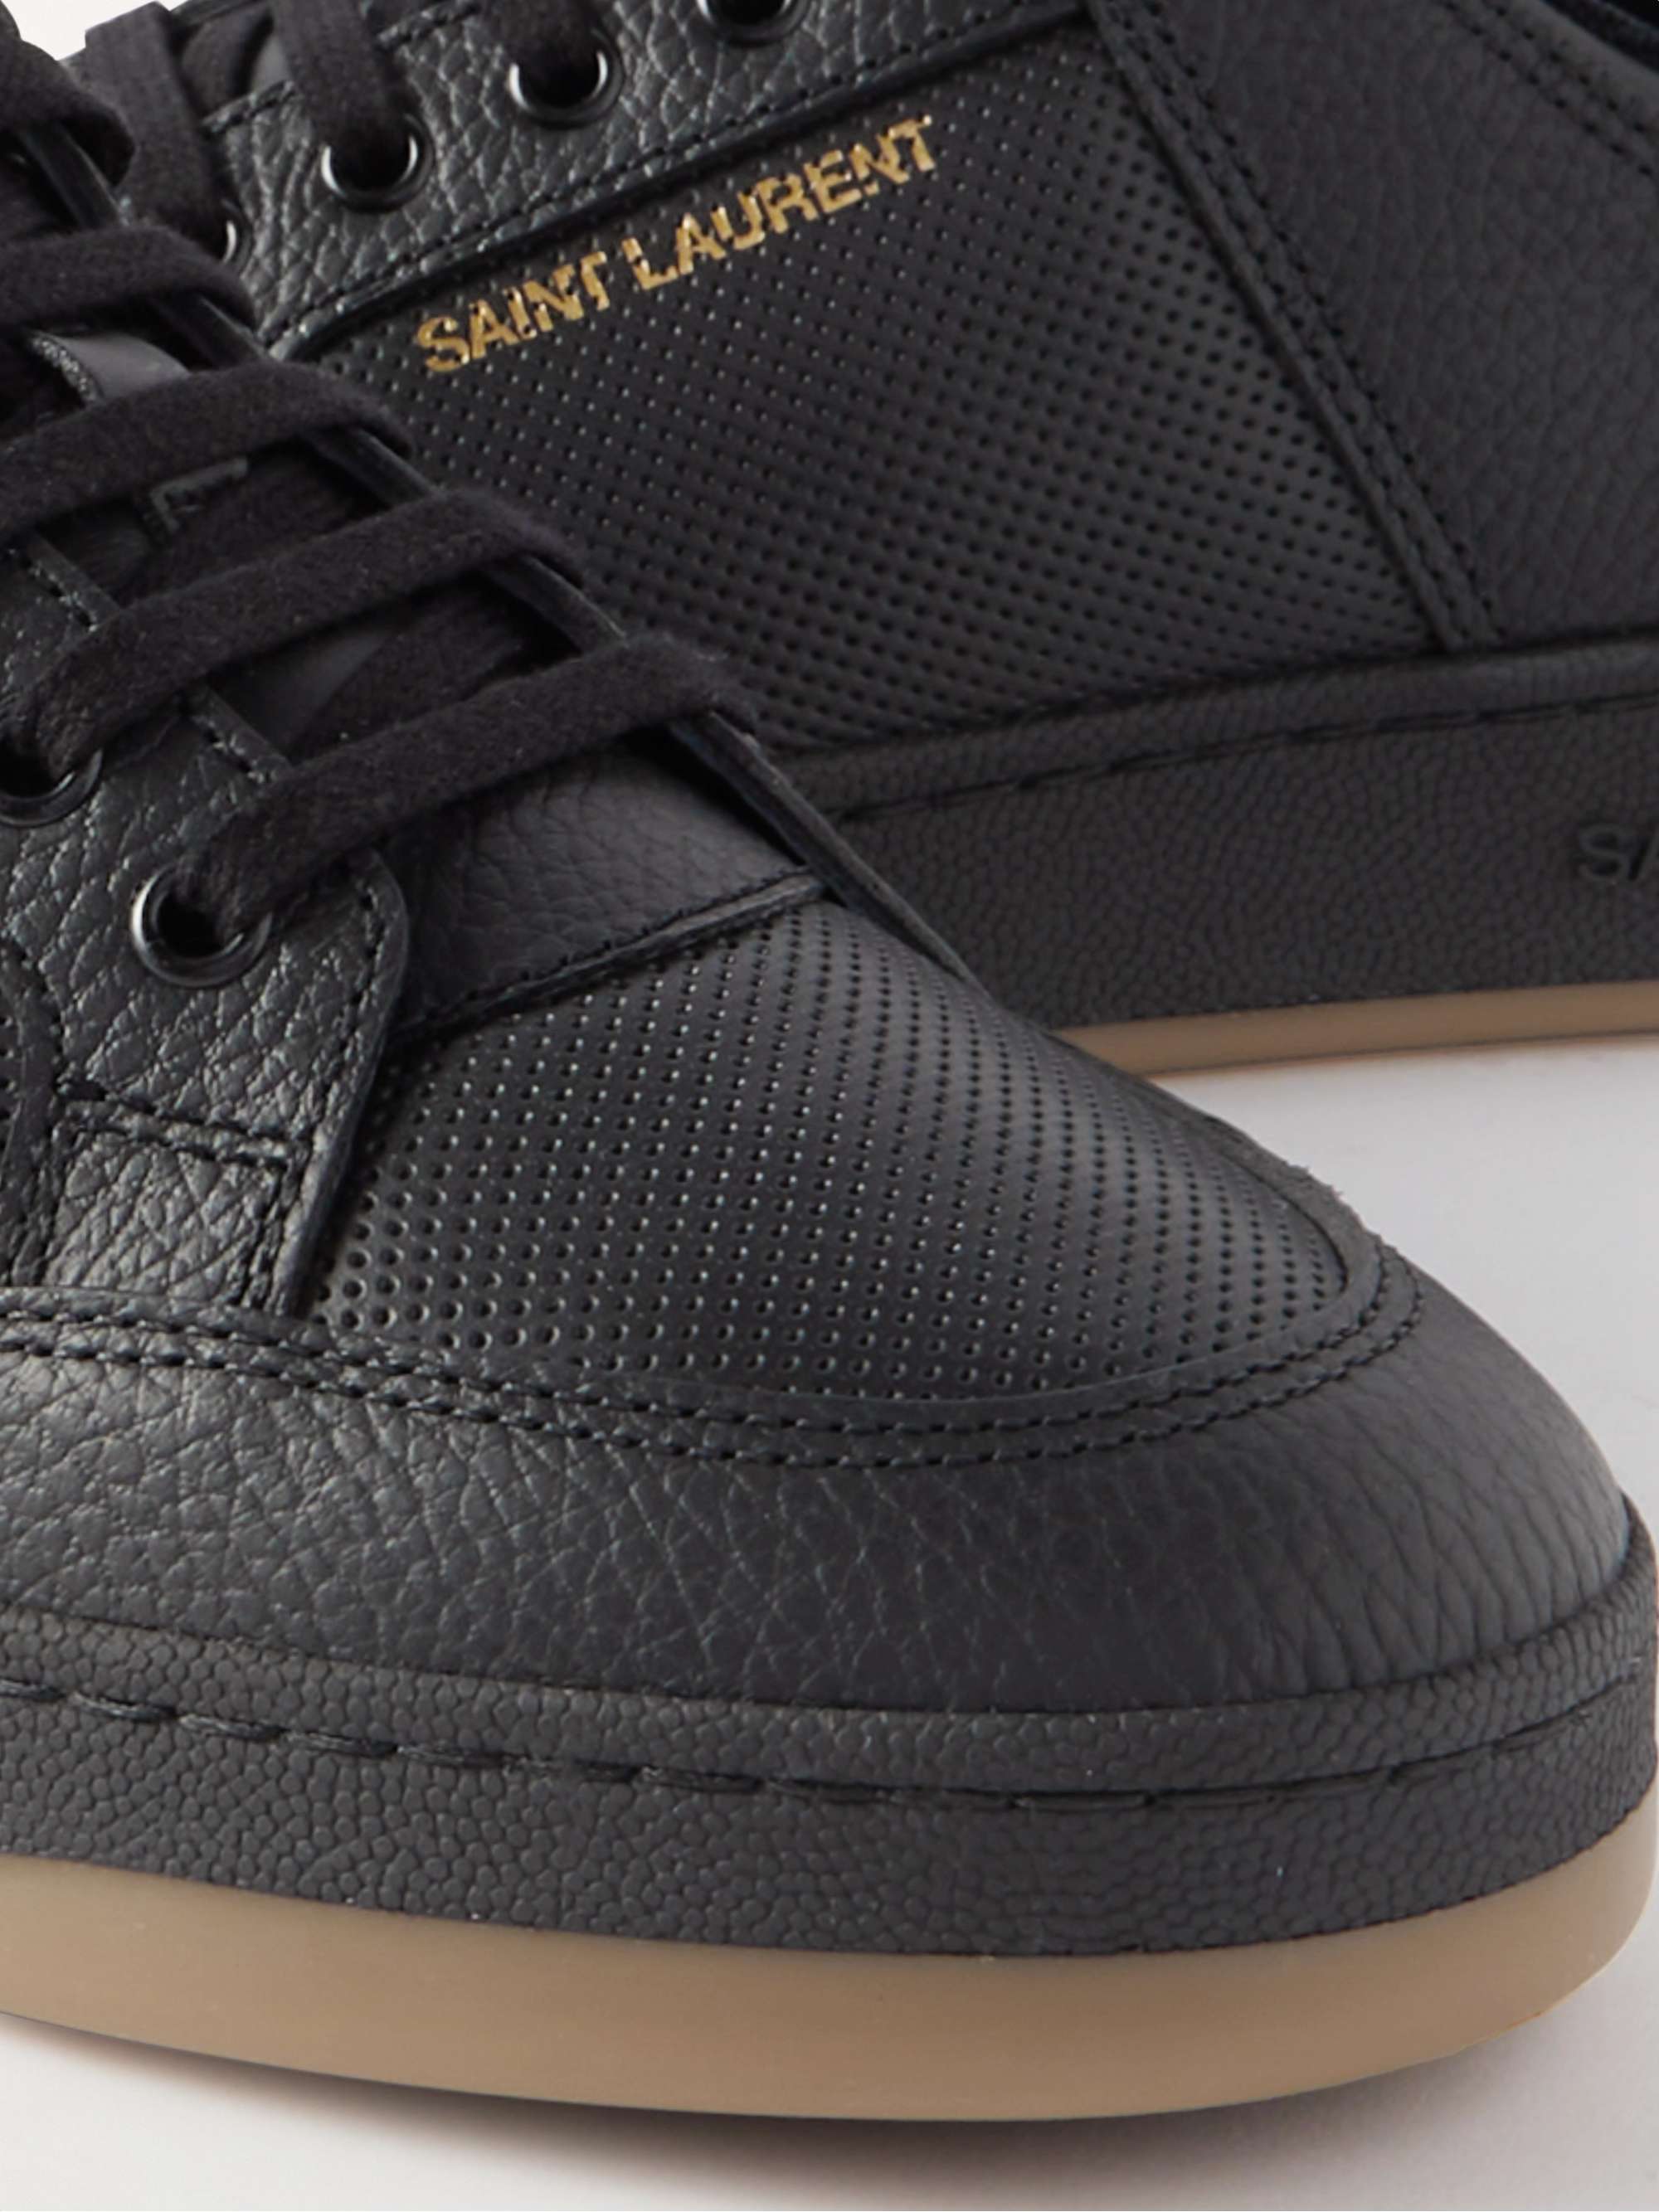 SAINT LAURENT SL/61 Perforated Leather Sneakers